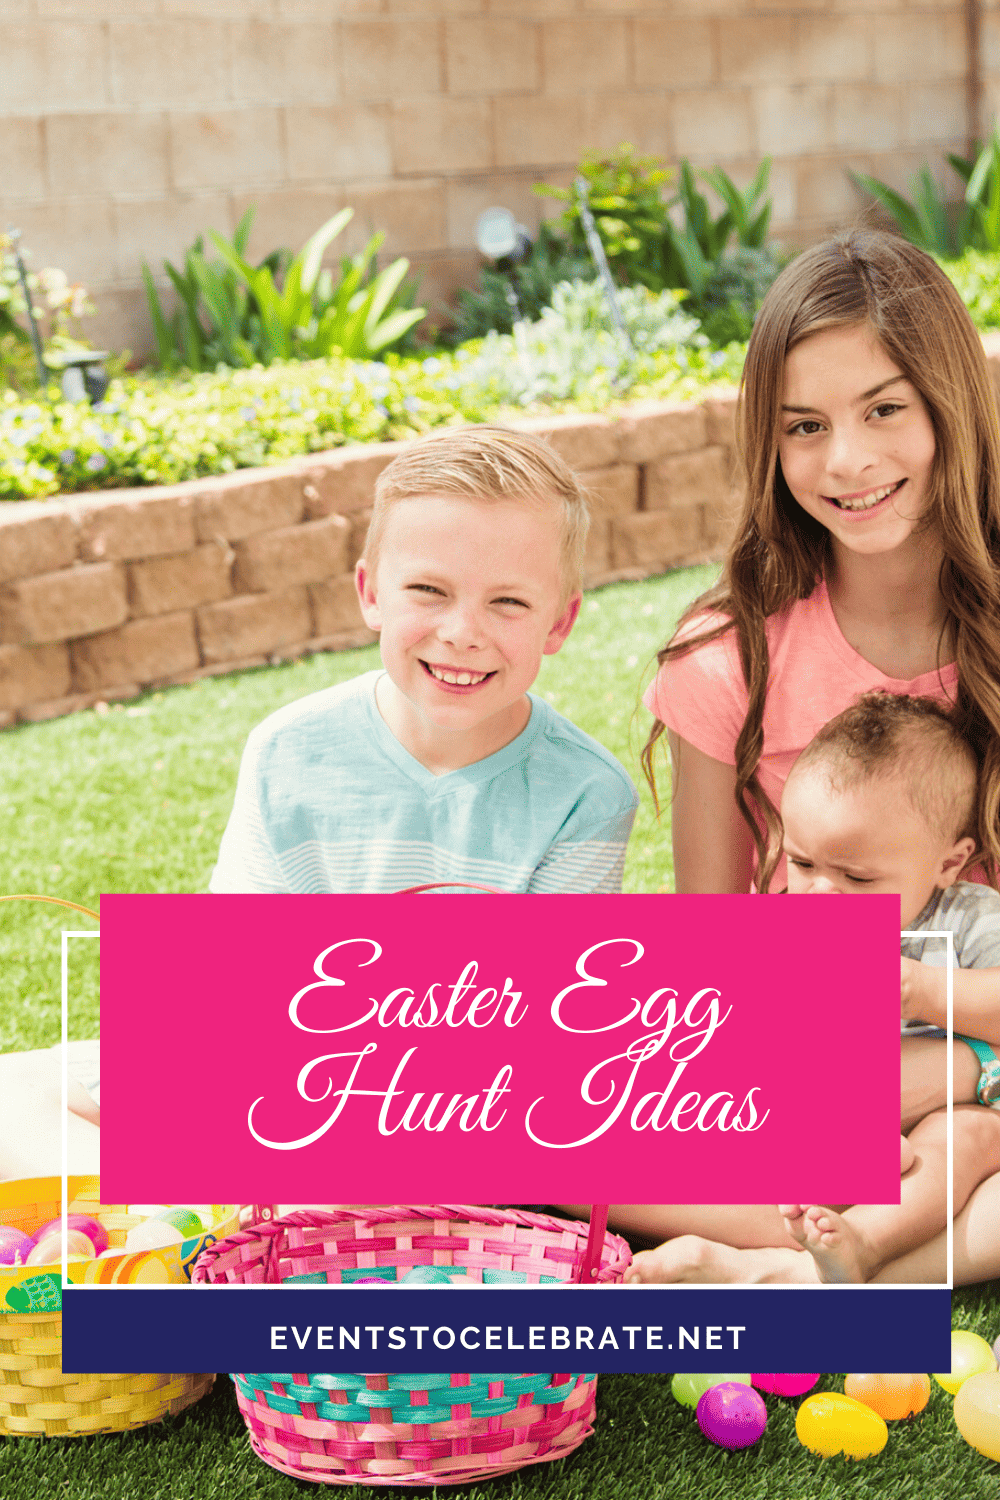 Easter Egg Hunt Ideas Party Ideas for Real People